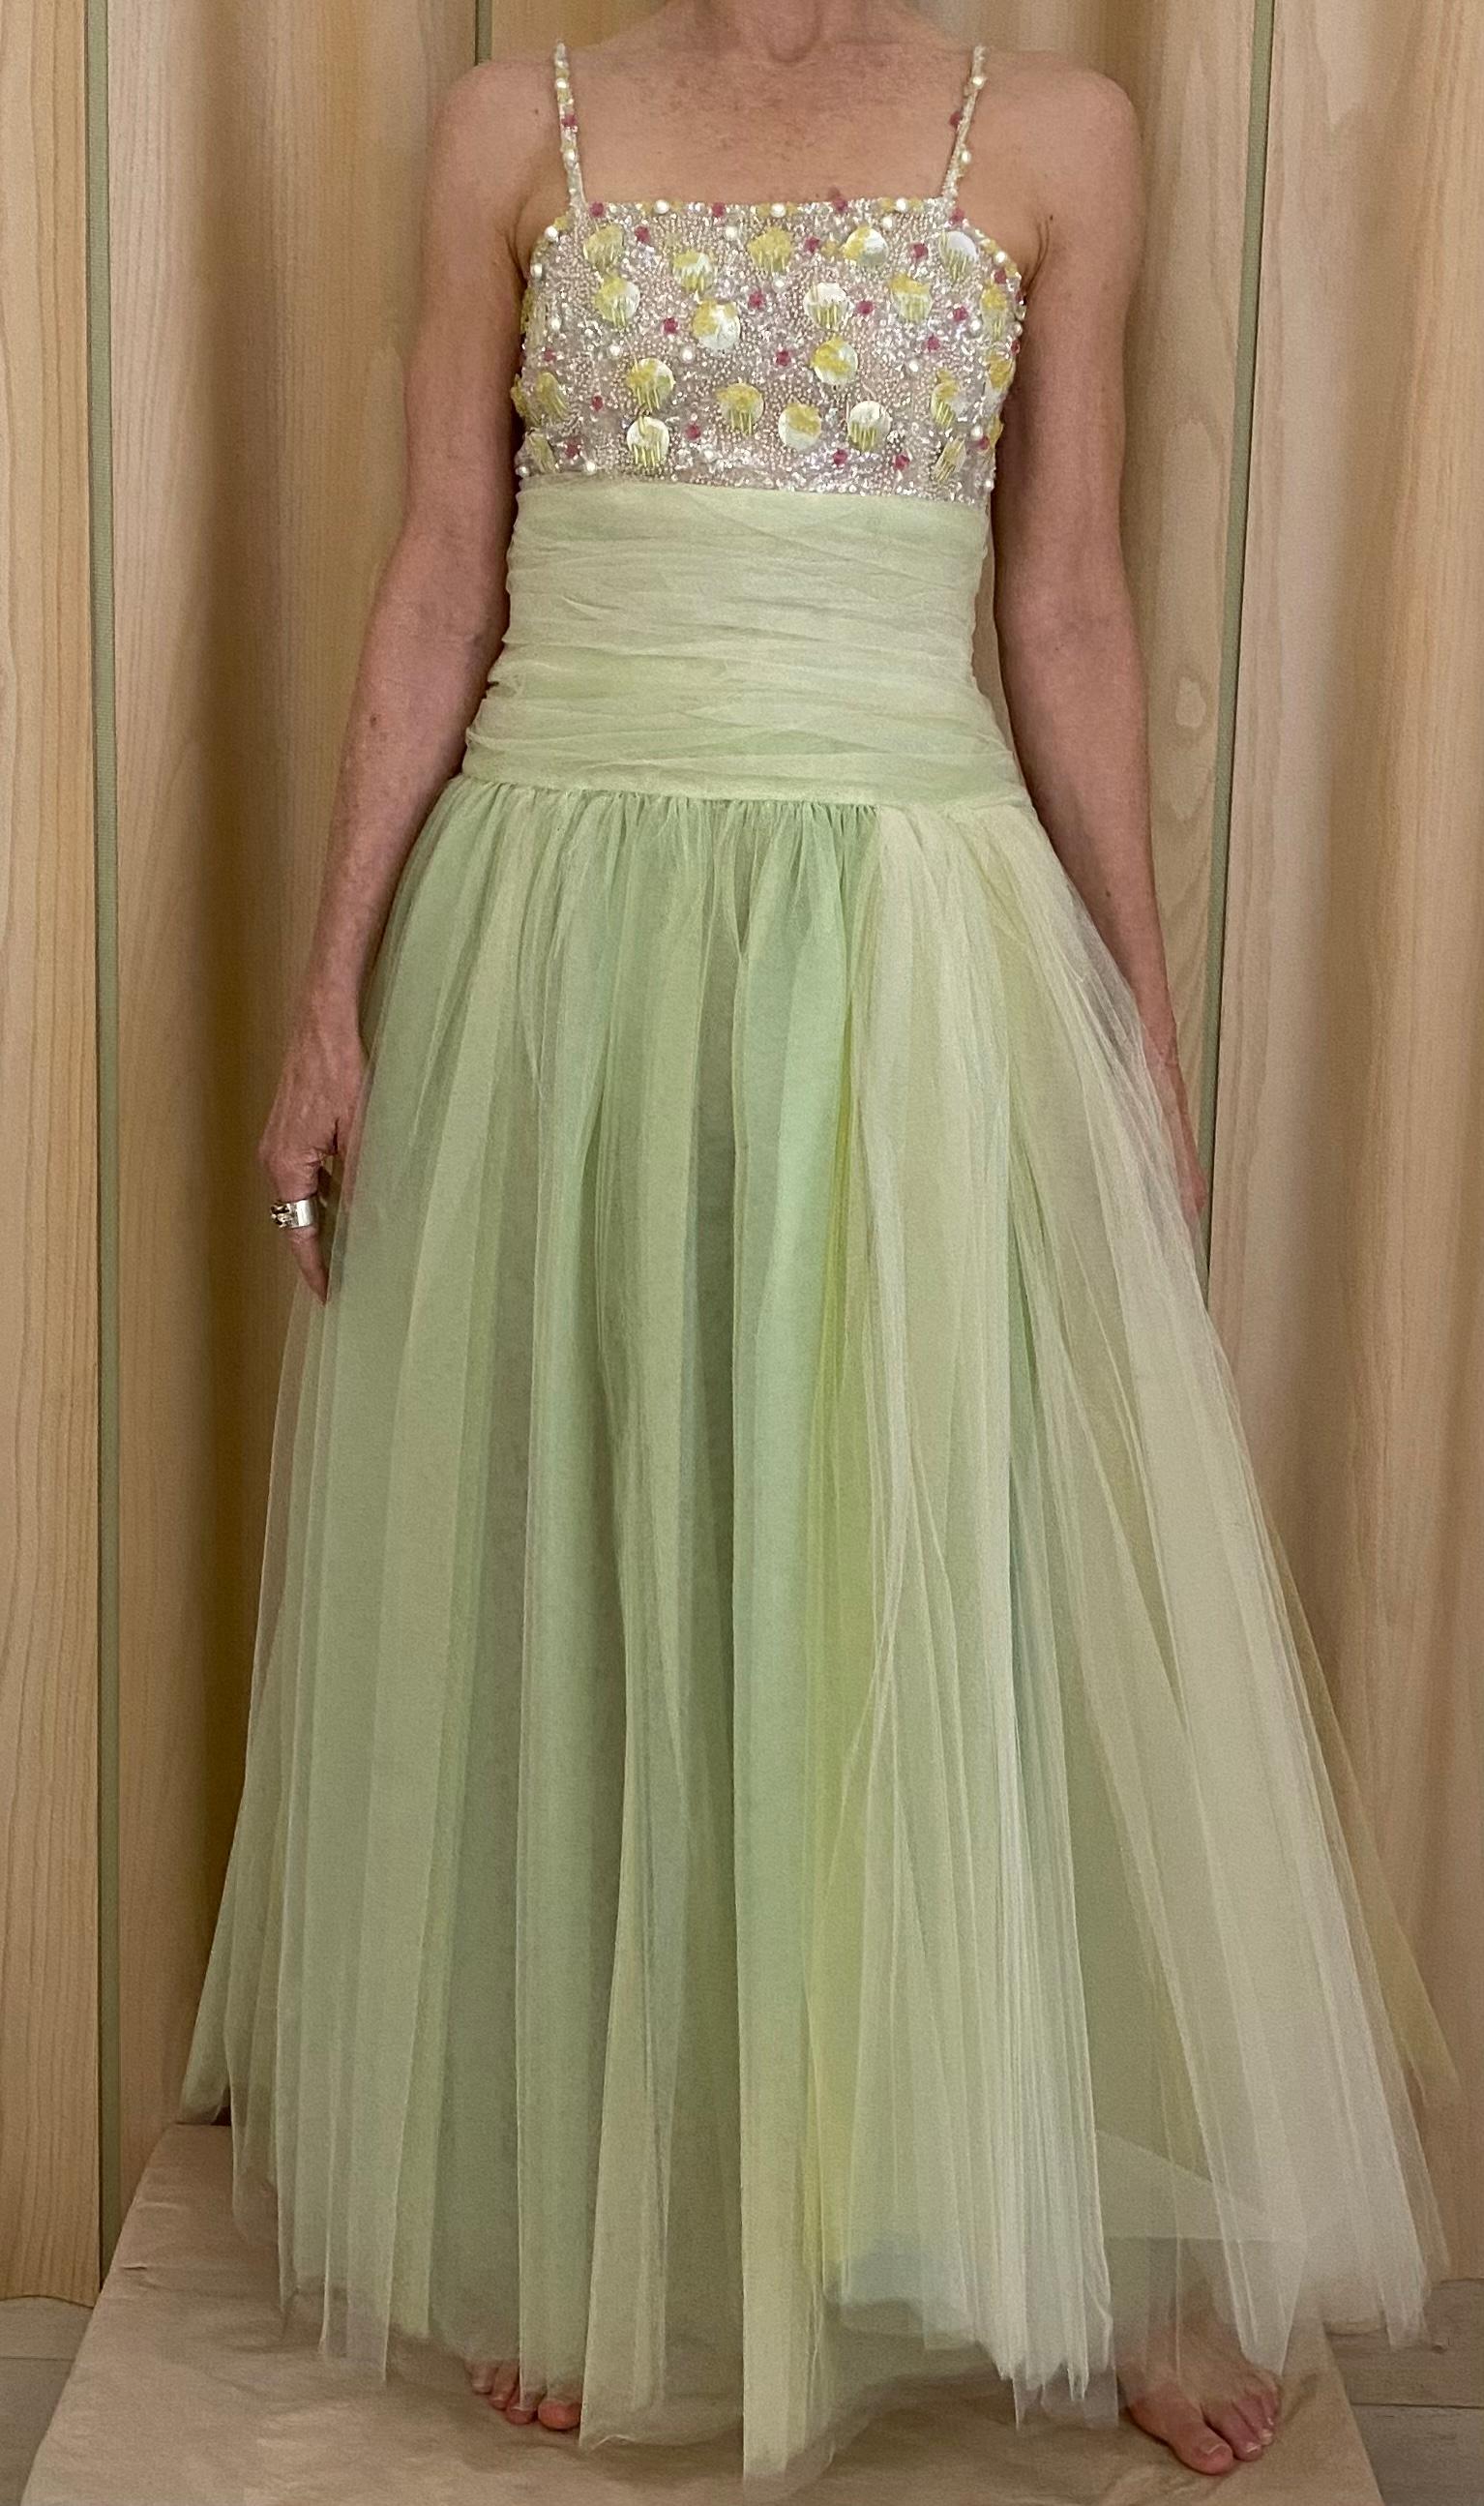 90s CHANEL Light Green Tulle Spaghetti Strap Dress In Good Condition For Sale In Beverly Hills, CA